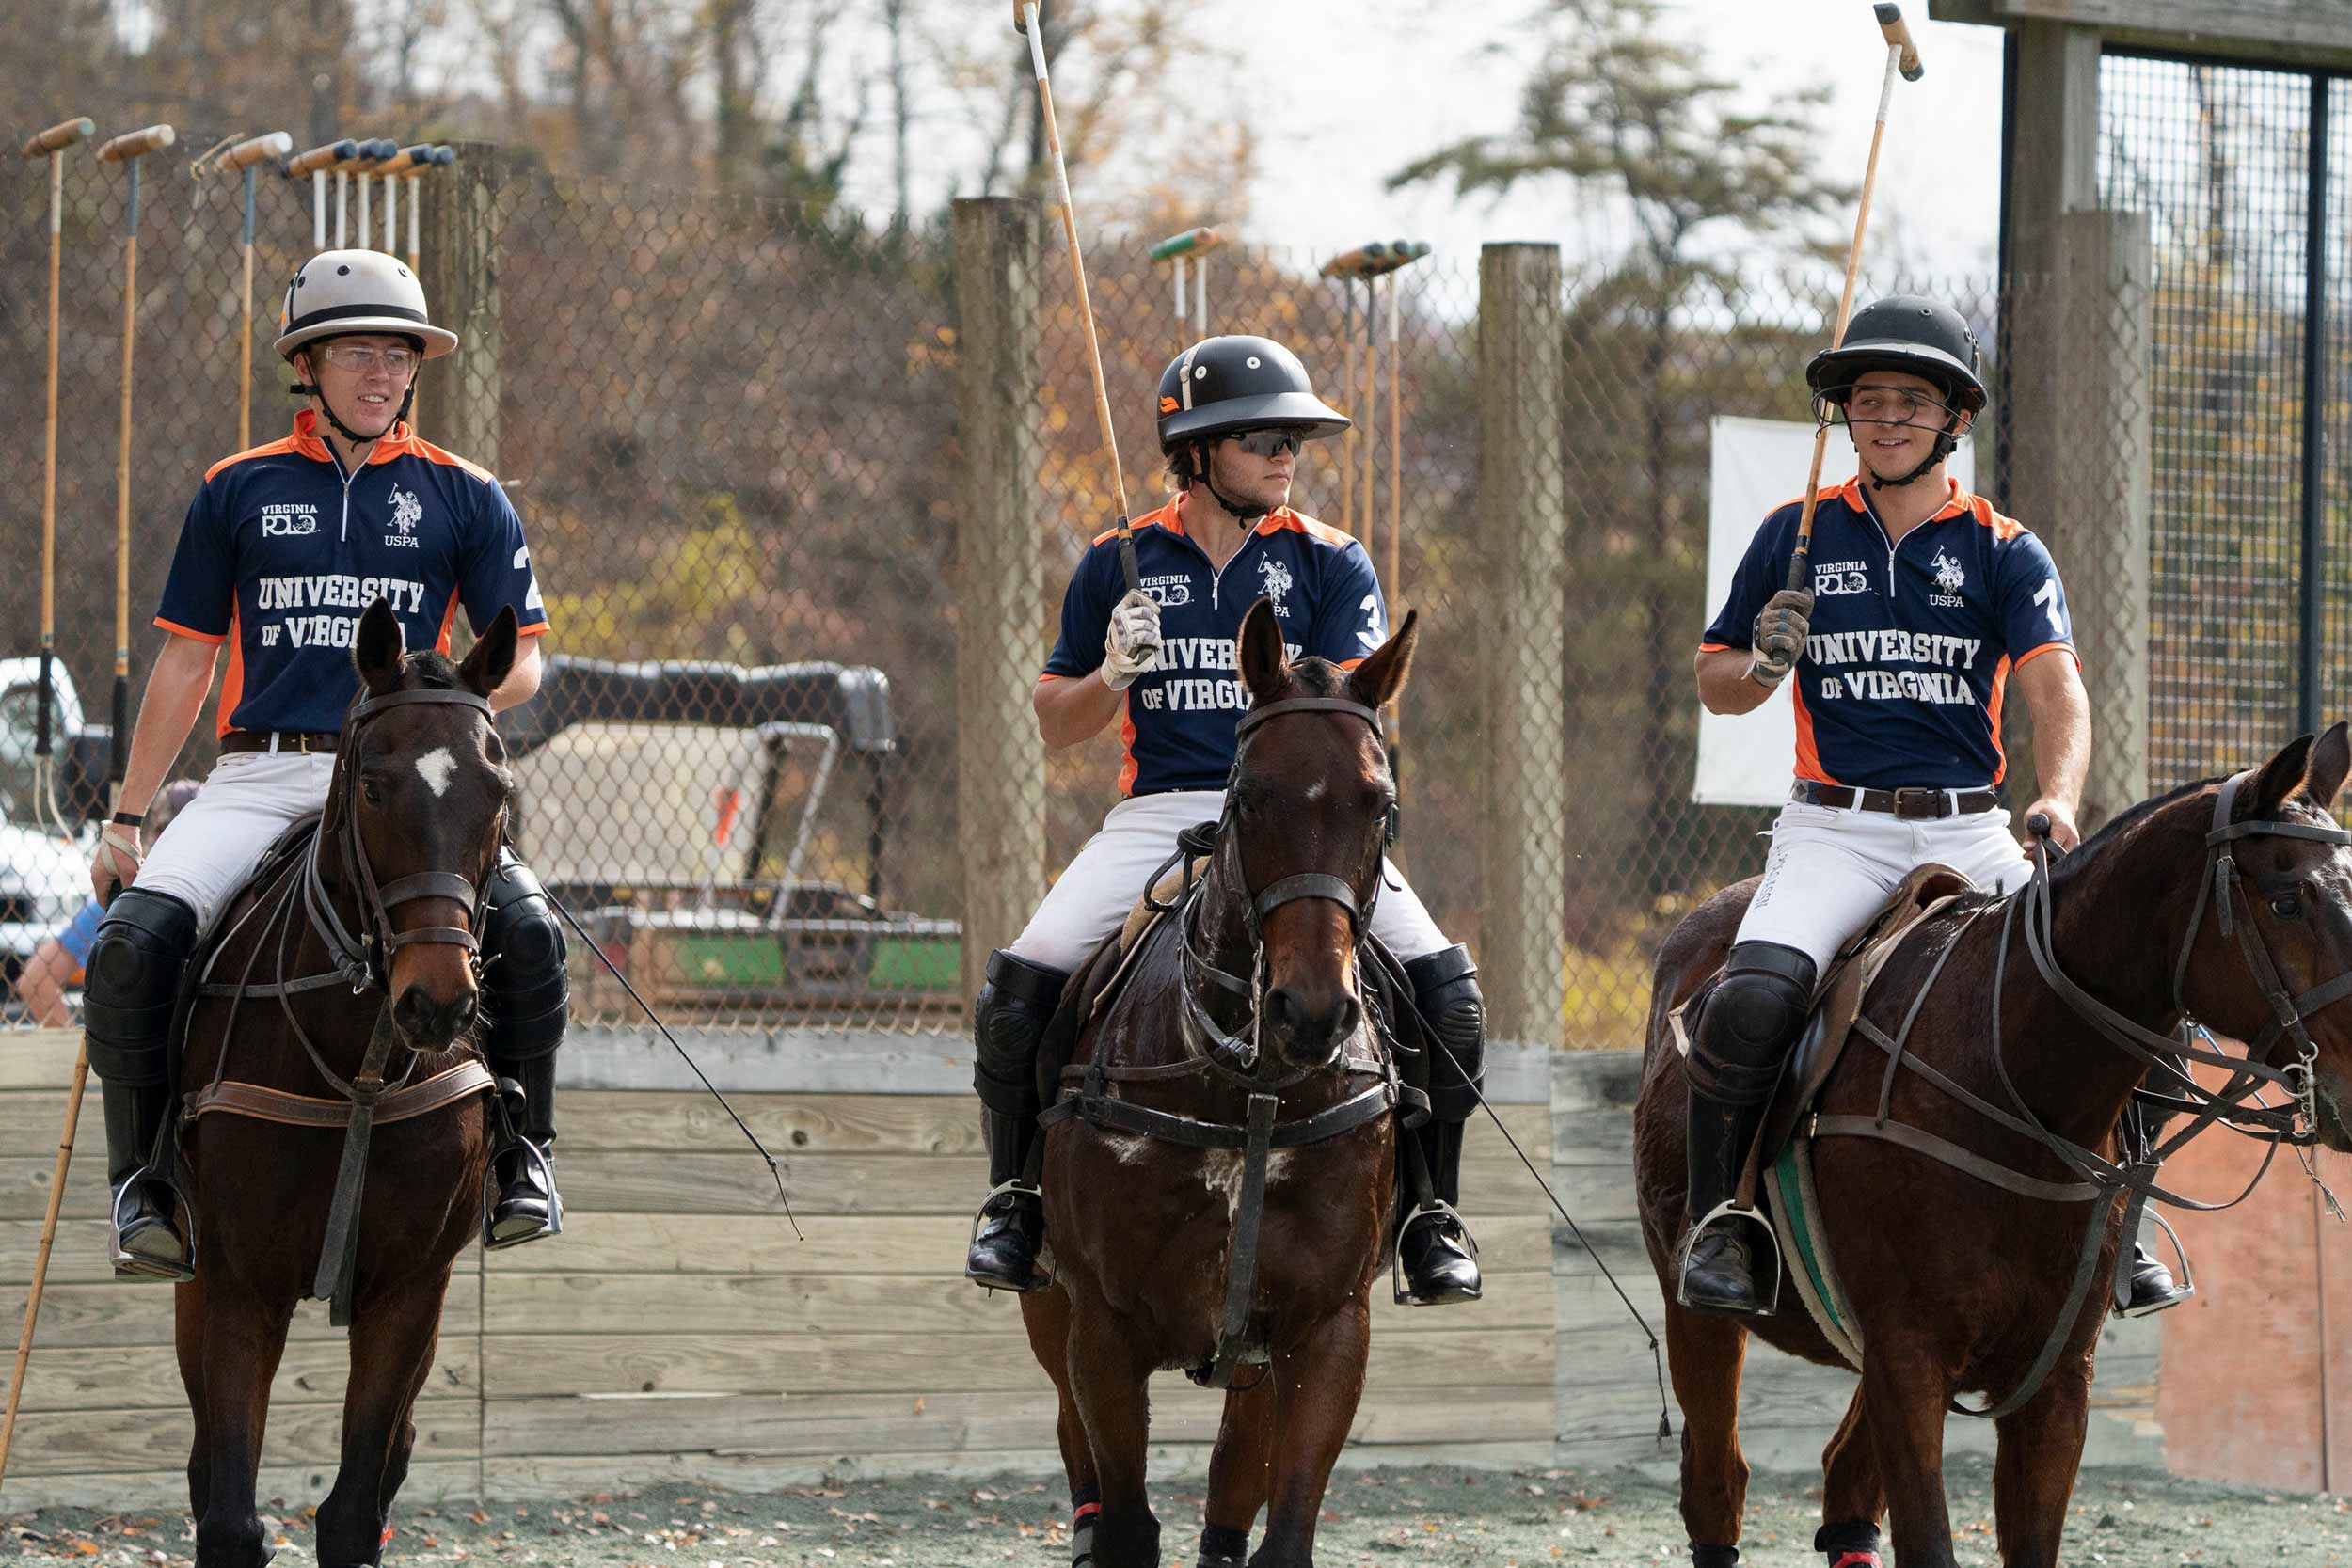 UVA polo players talking while sitting on horses